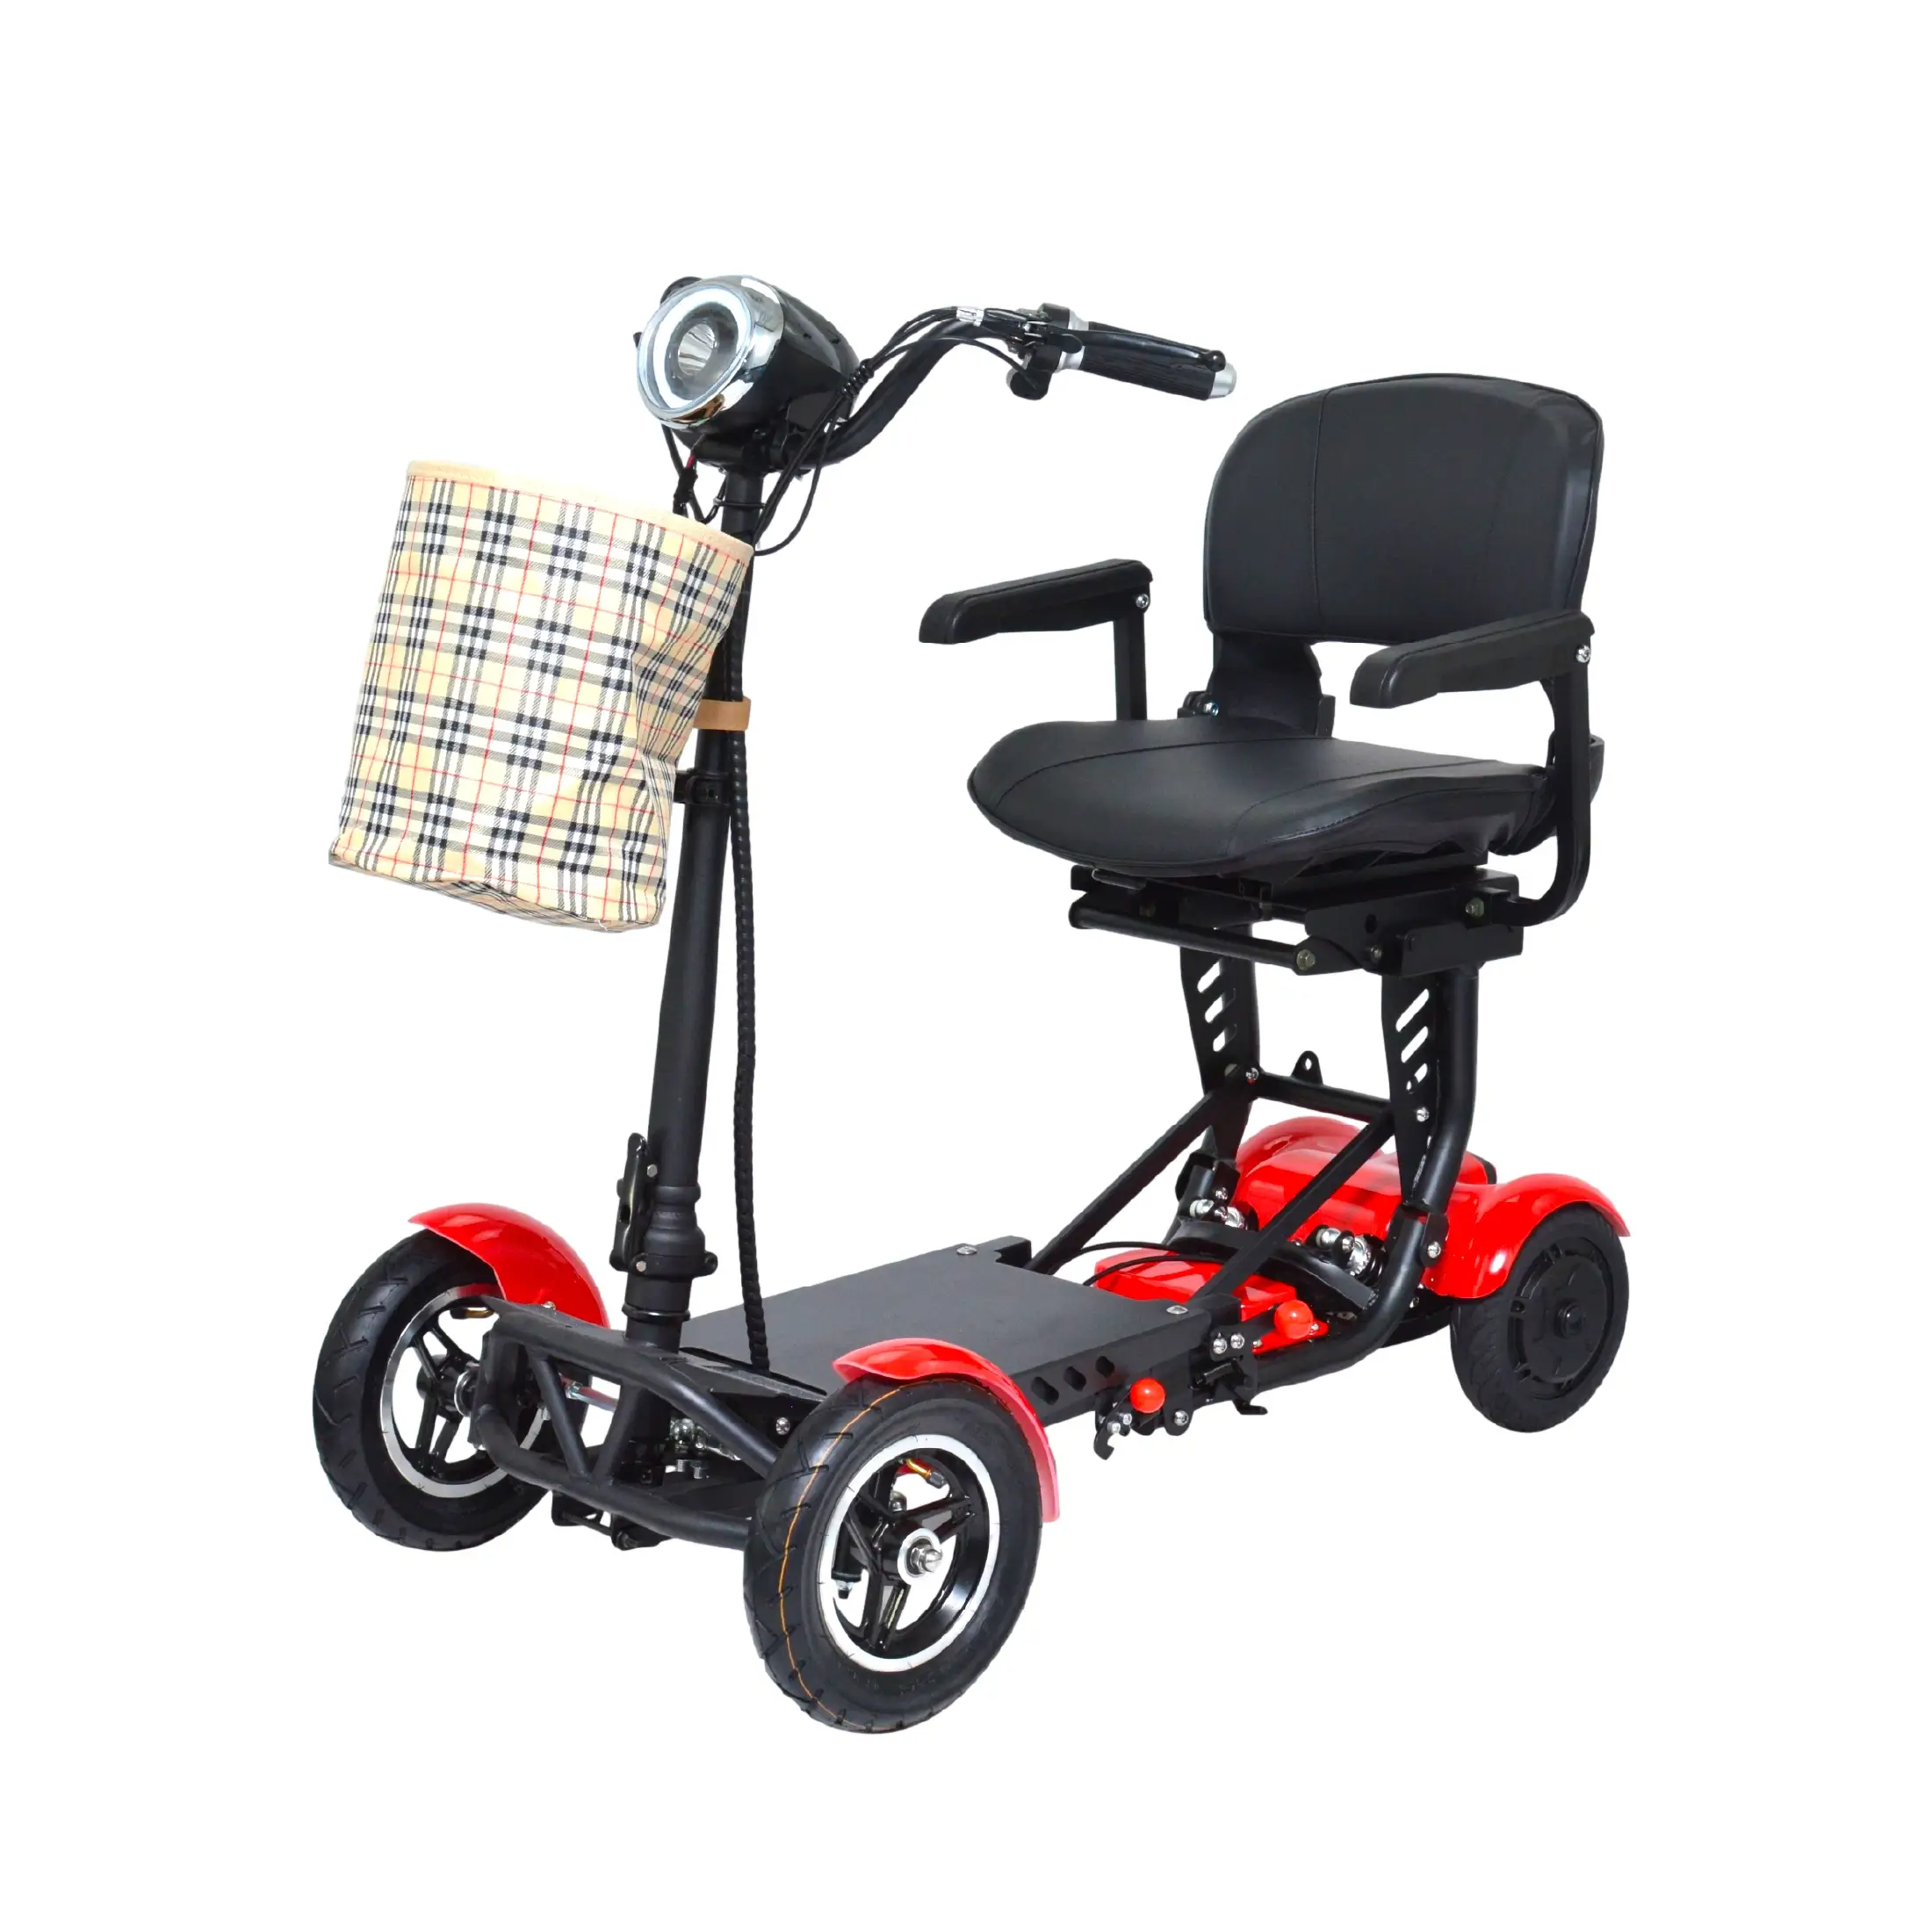 MS-3000 Foldable Mobility Scooter 300-400 lbs 5